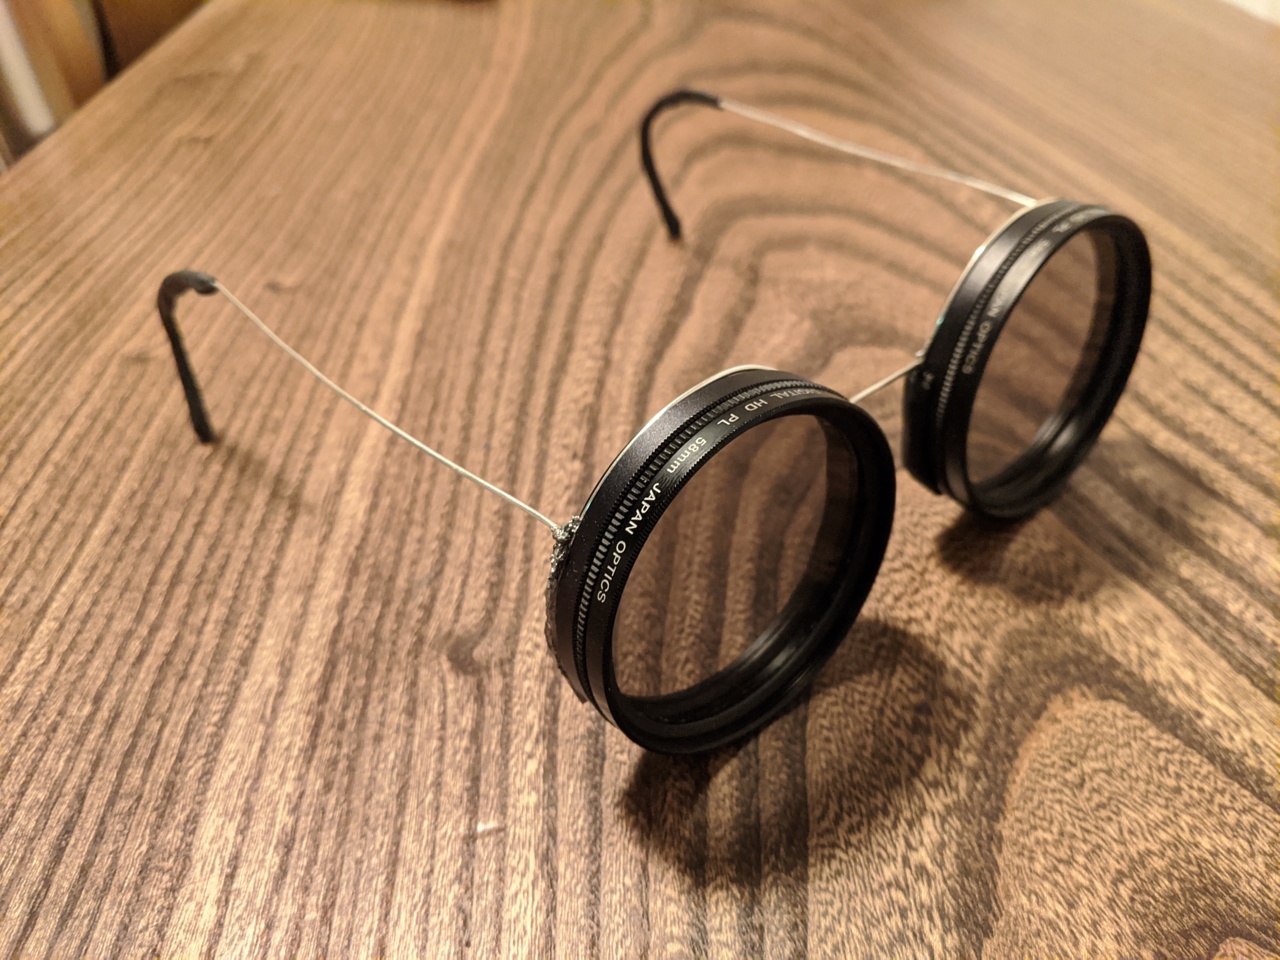 polarizer glasses made from camera lenses and wire